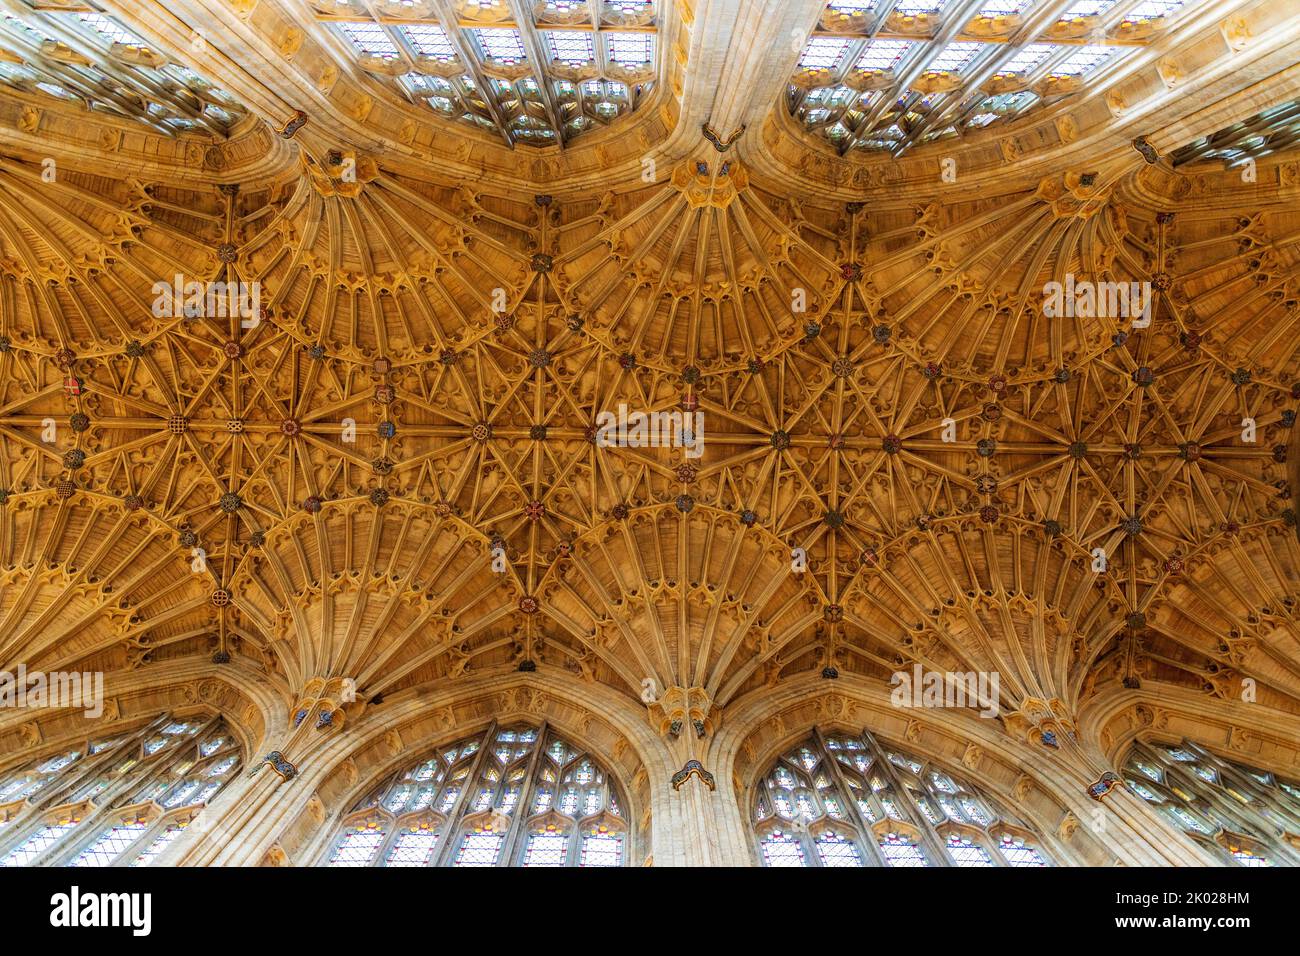 The magnifcent fan-vaulted roof above the nave in Sherborne Abbey, Dorset, England, UK Stock Photo